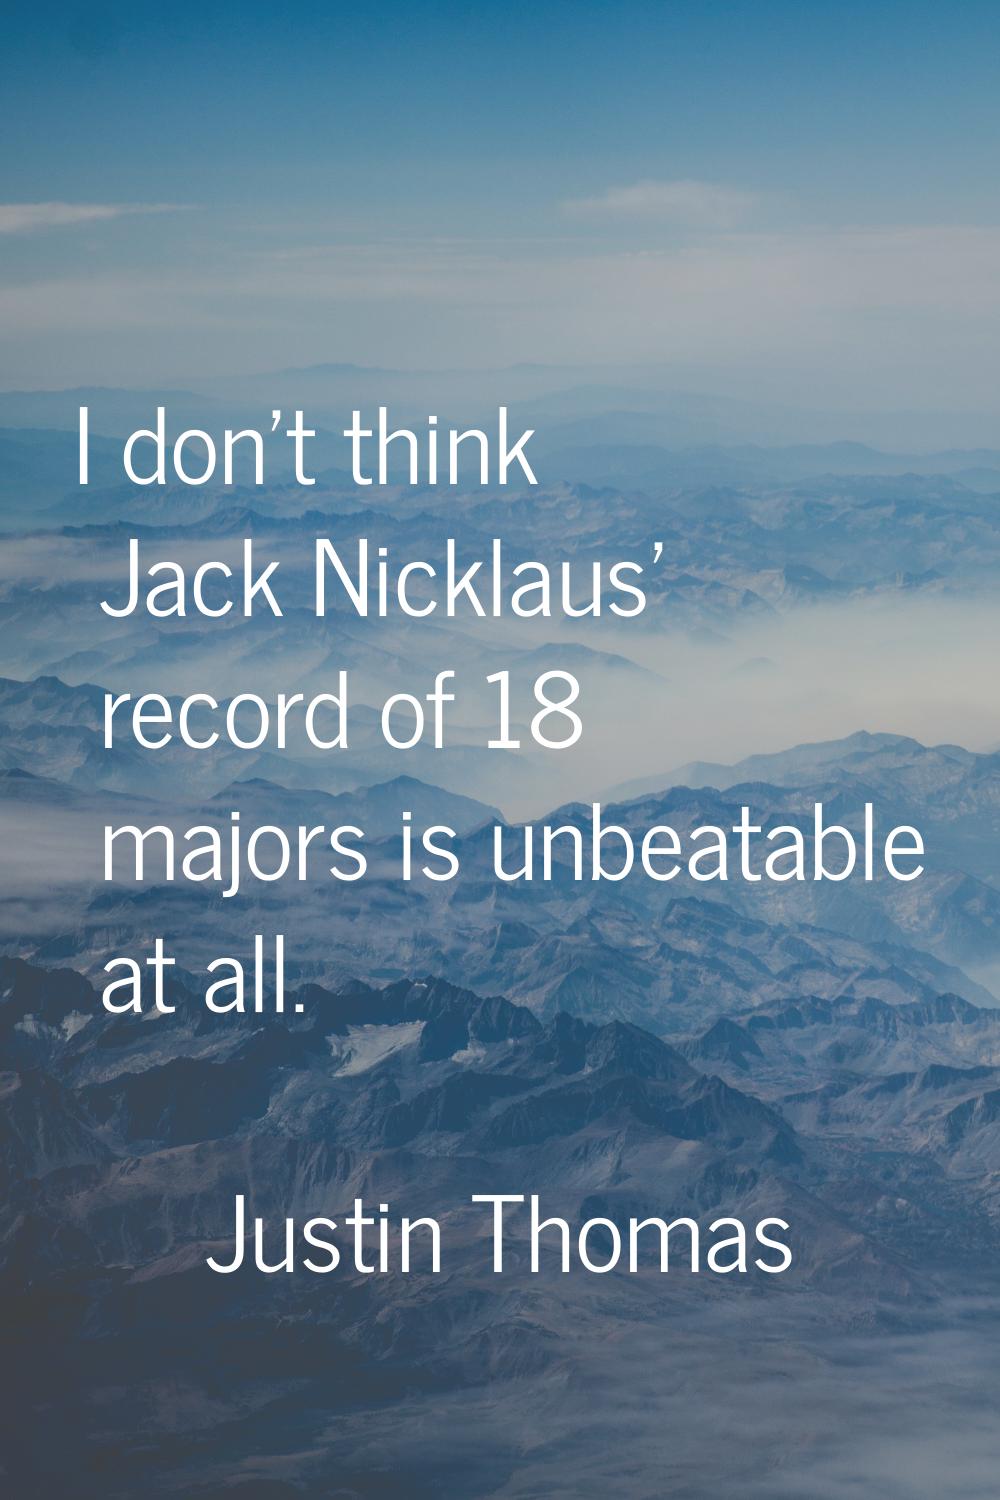 I don't think Jack Nicklaus' record of 18 majors is unbeatable at all.